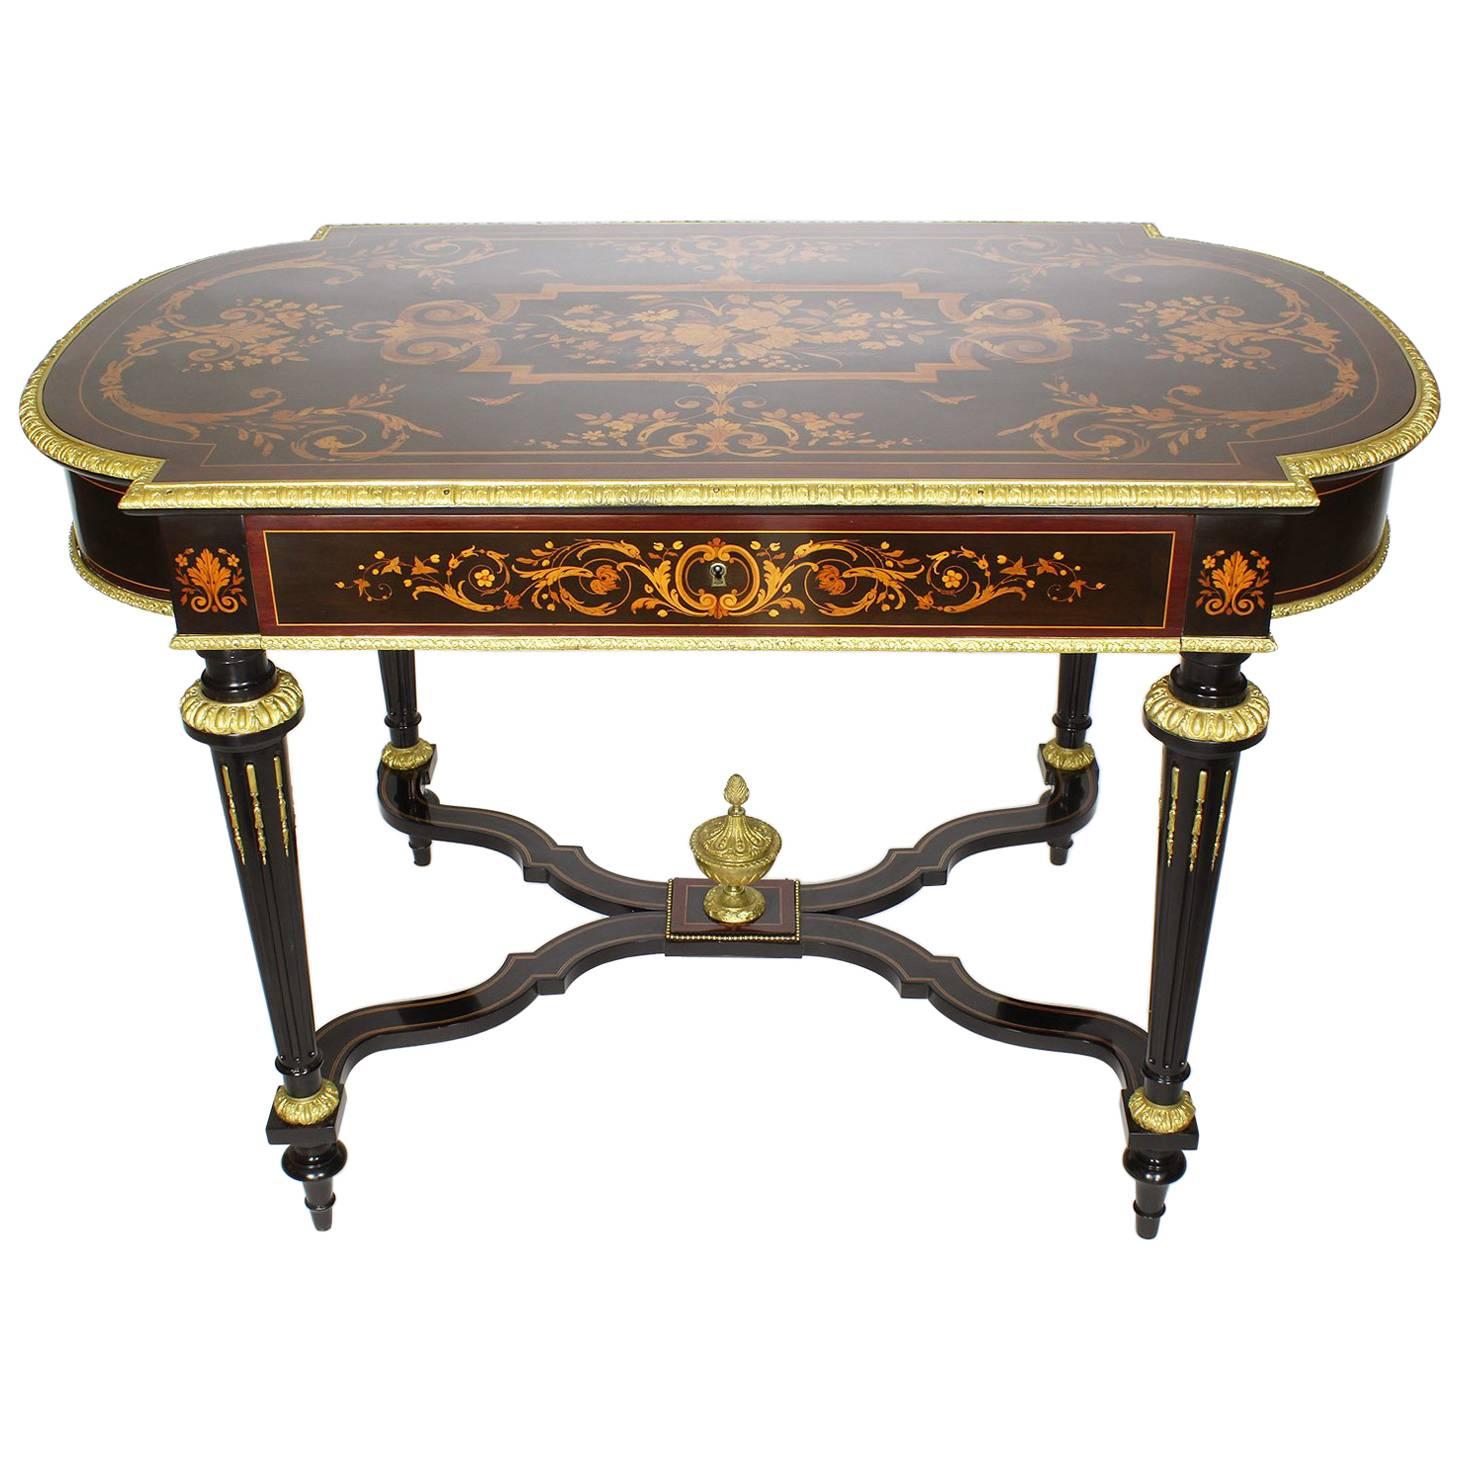 French 19th Century Louis XVI Style Gilt Bronze-Mounted Center, Writing Table For Sale